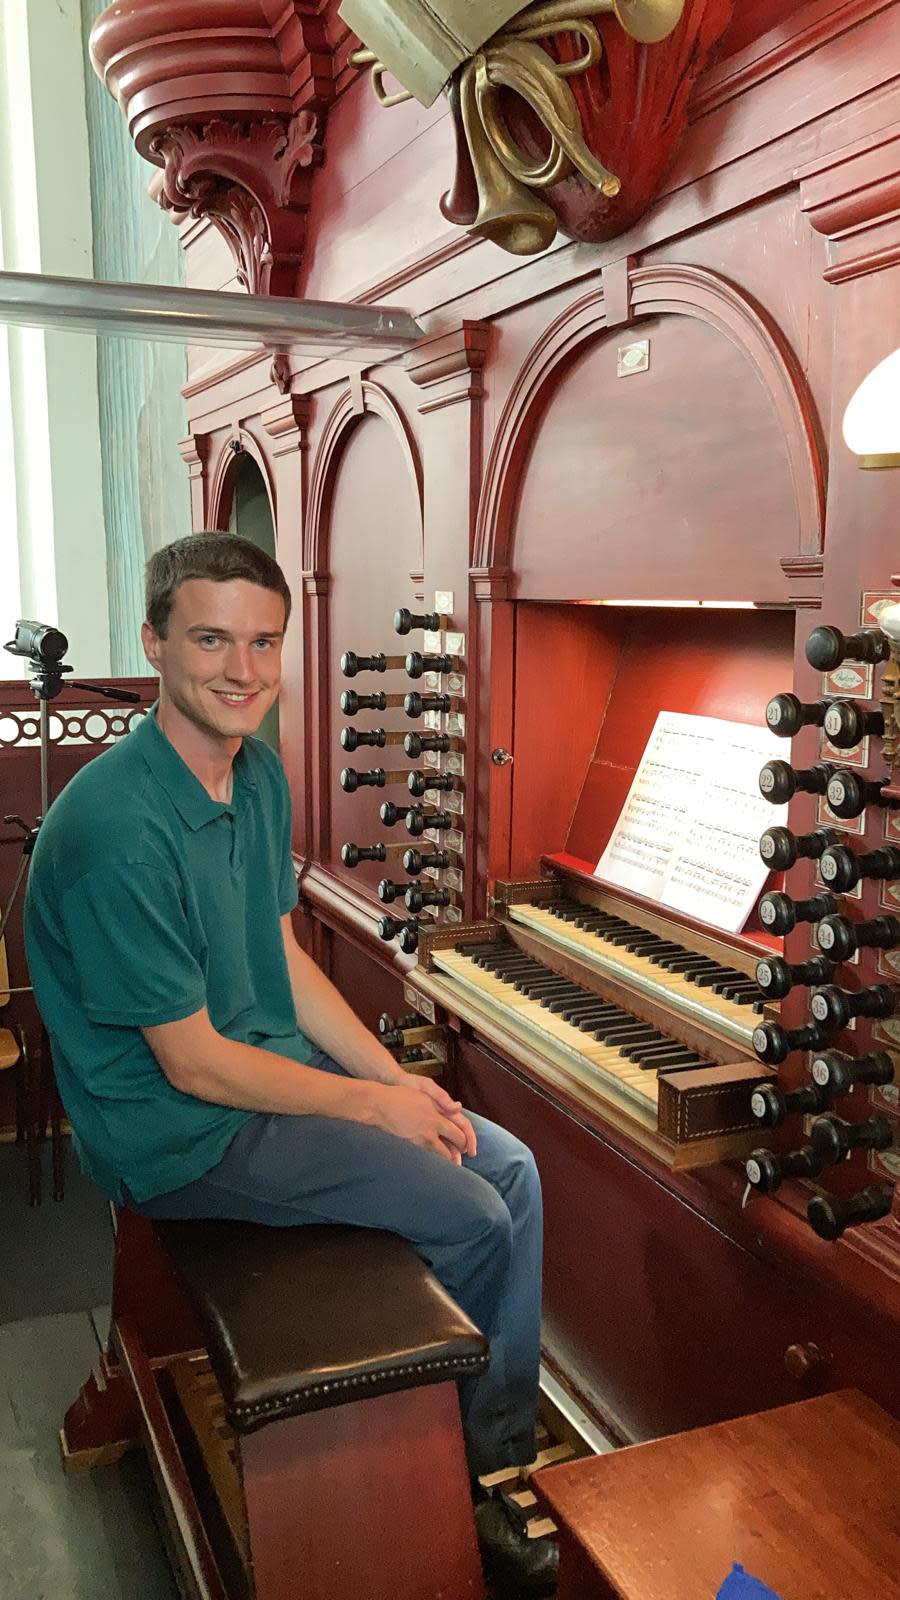 Michael Kearney will perform on historic pipe organs in New Sewickley Township.